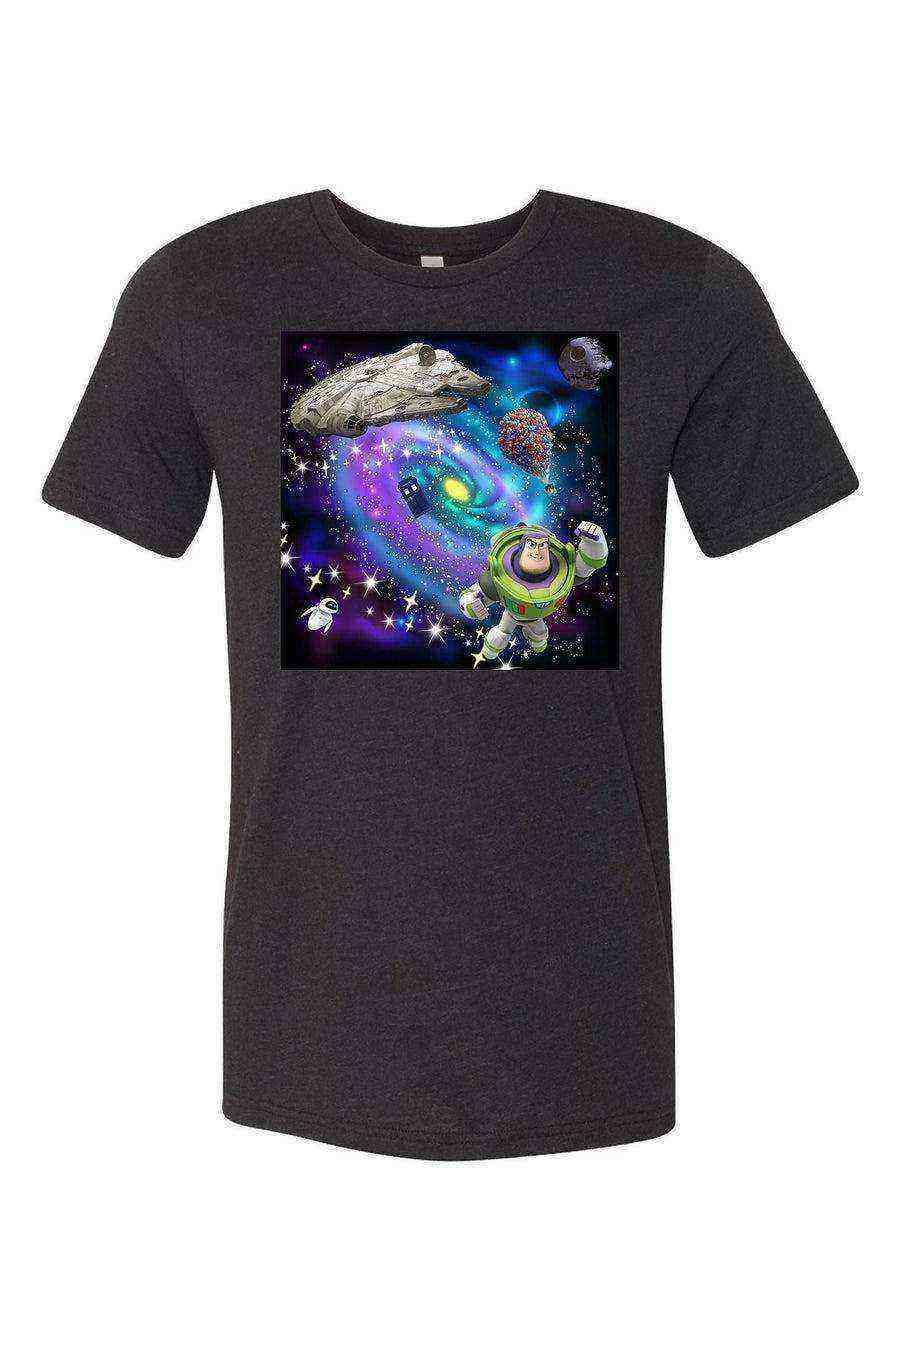 Toddler | To Infinity And Beyond Shirt | Outer Space Shirt - Dylan's Tees